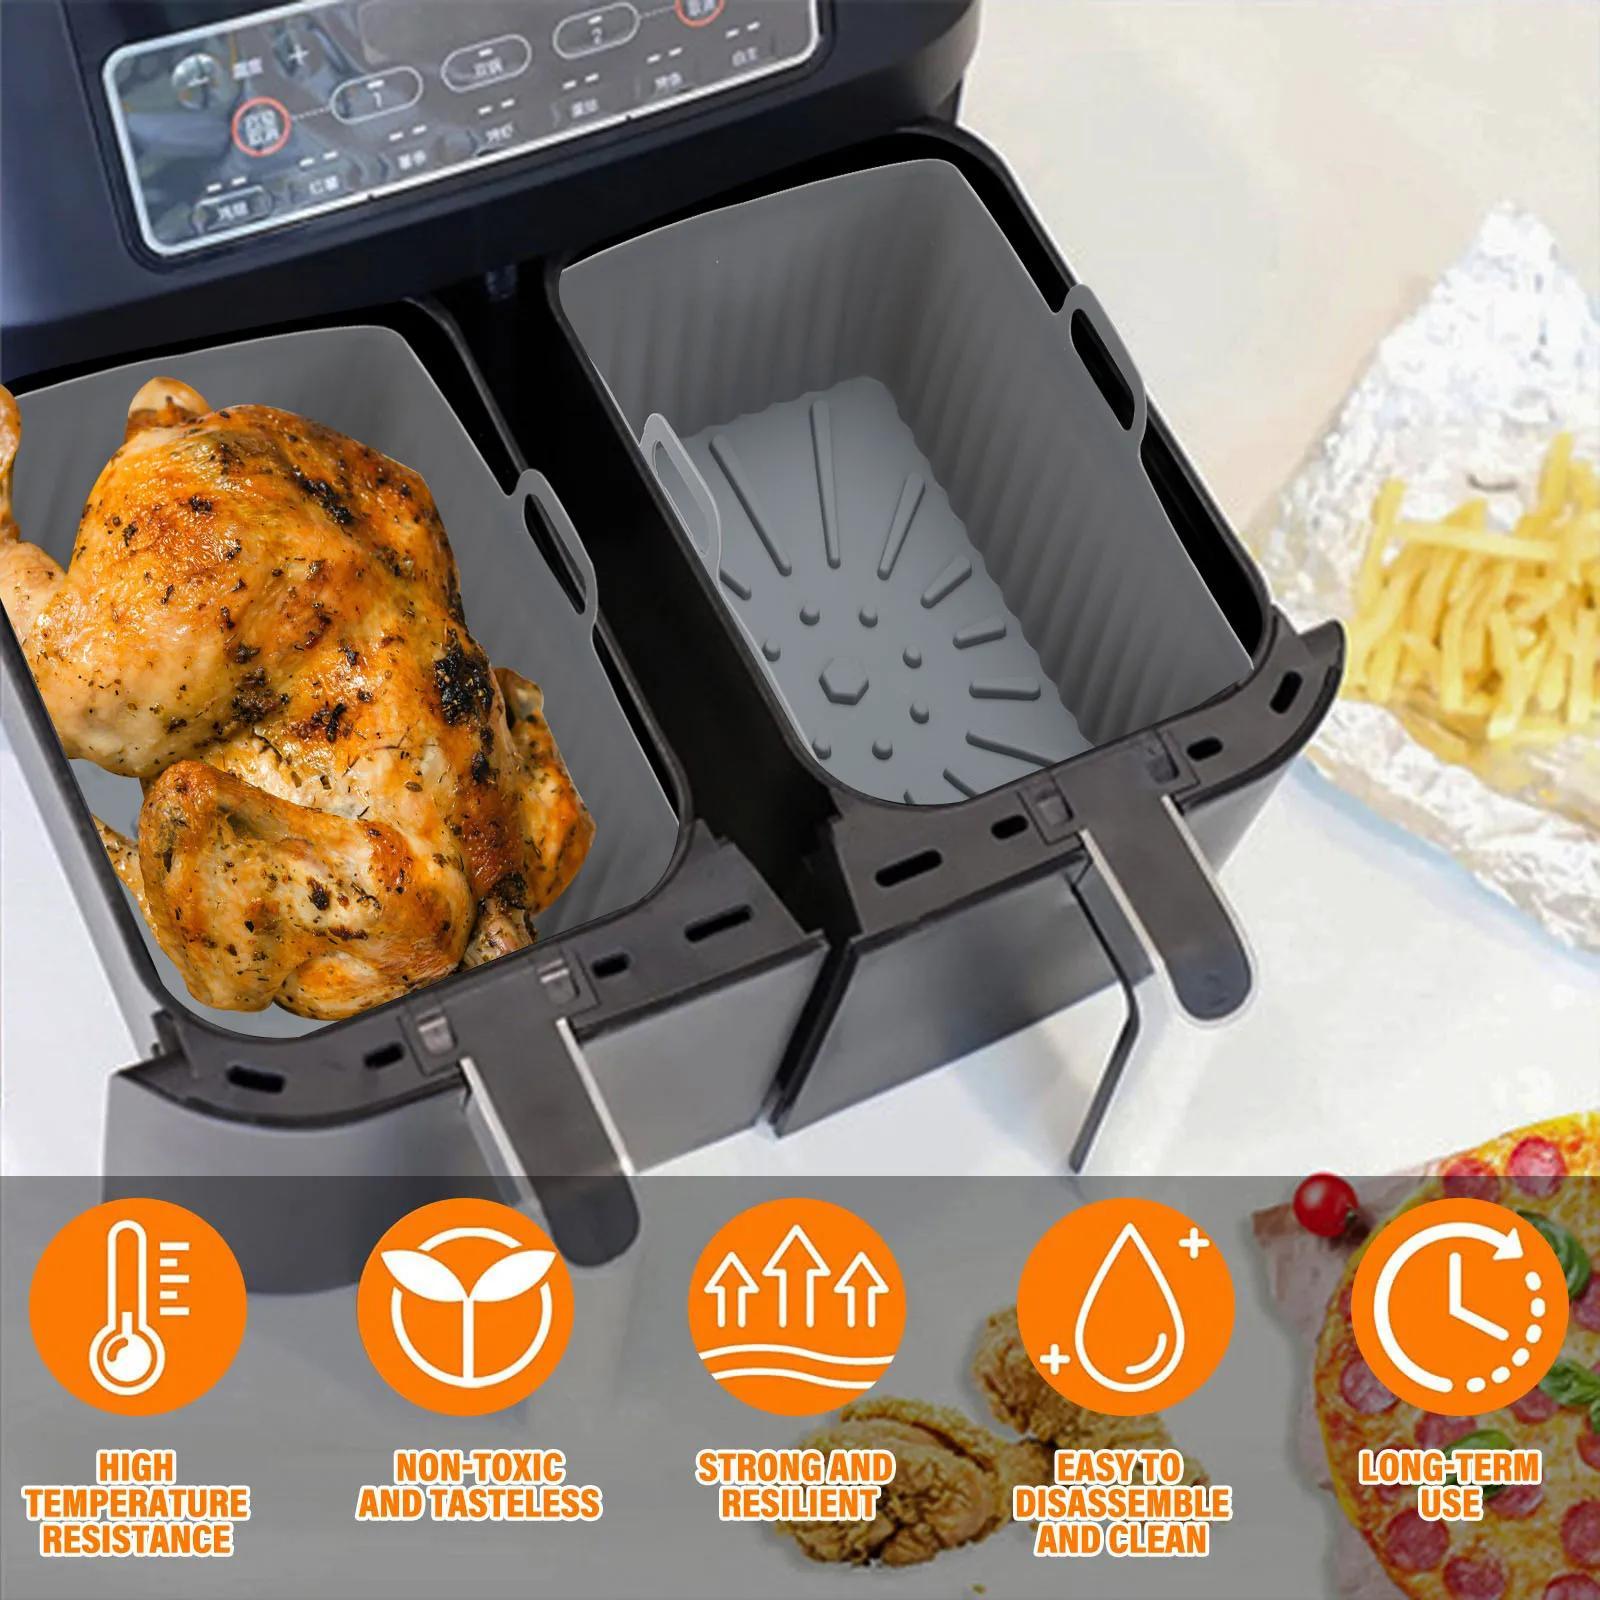 The Air Fryer Baking Tray: Special Barbecue Tray, Reusable Bowl, Anti-Stick  Mat & Thickened Silicone Baking Tray - Perfect for Reheating & Baking!